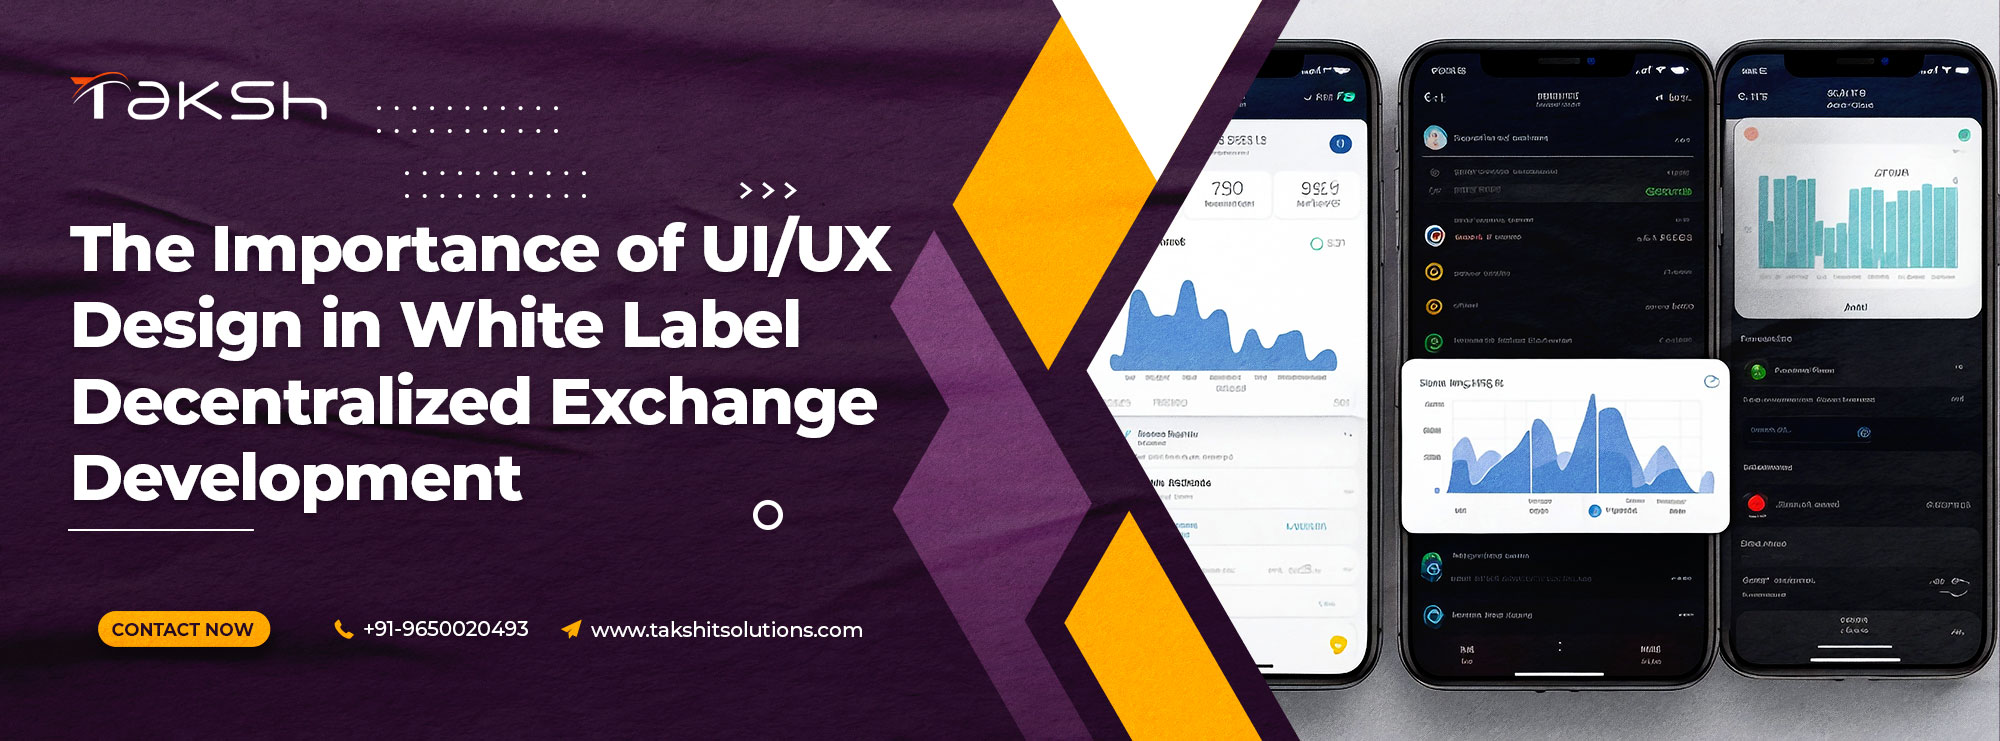 The Importance of UI/UX Design in White Label Decentralized Exchange Development